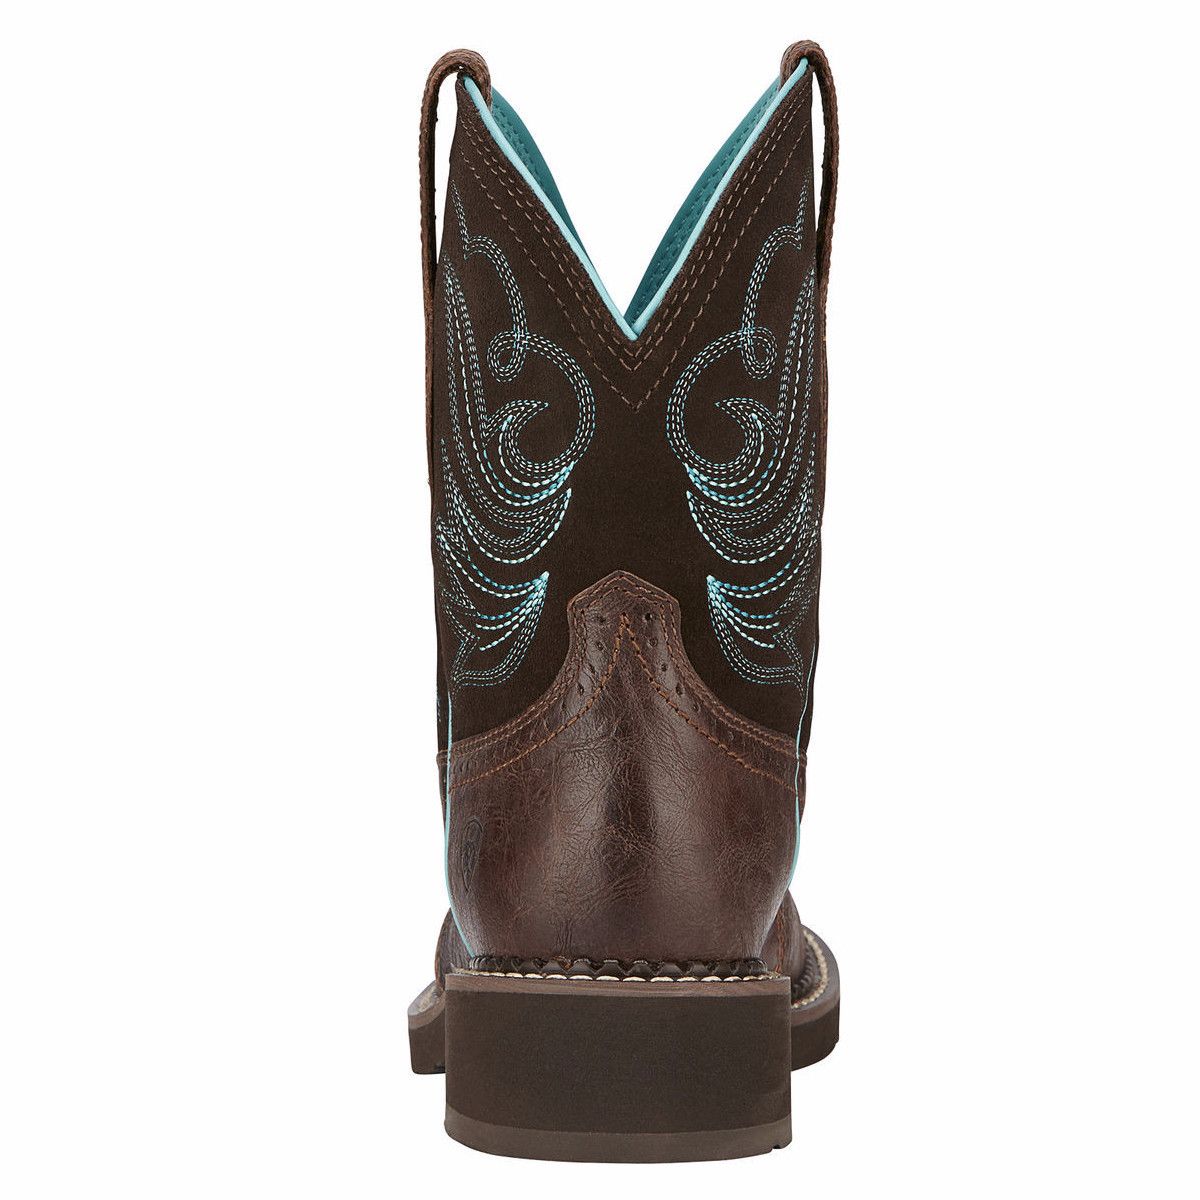 Ariat Ladies Fatbaby Heritage Dapper Royal Choc Short Boots 10016238 - Wild West Boot Store